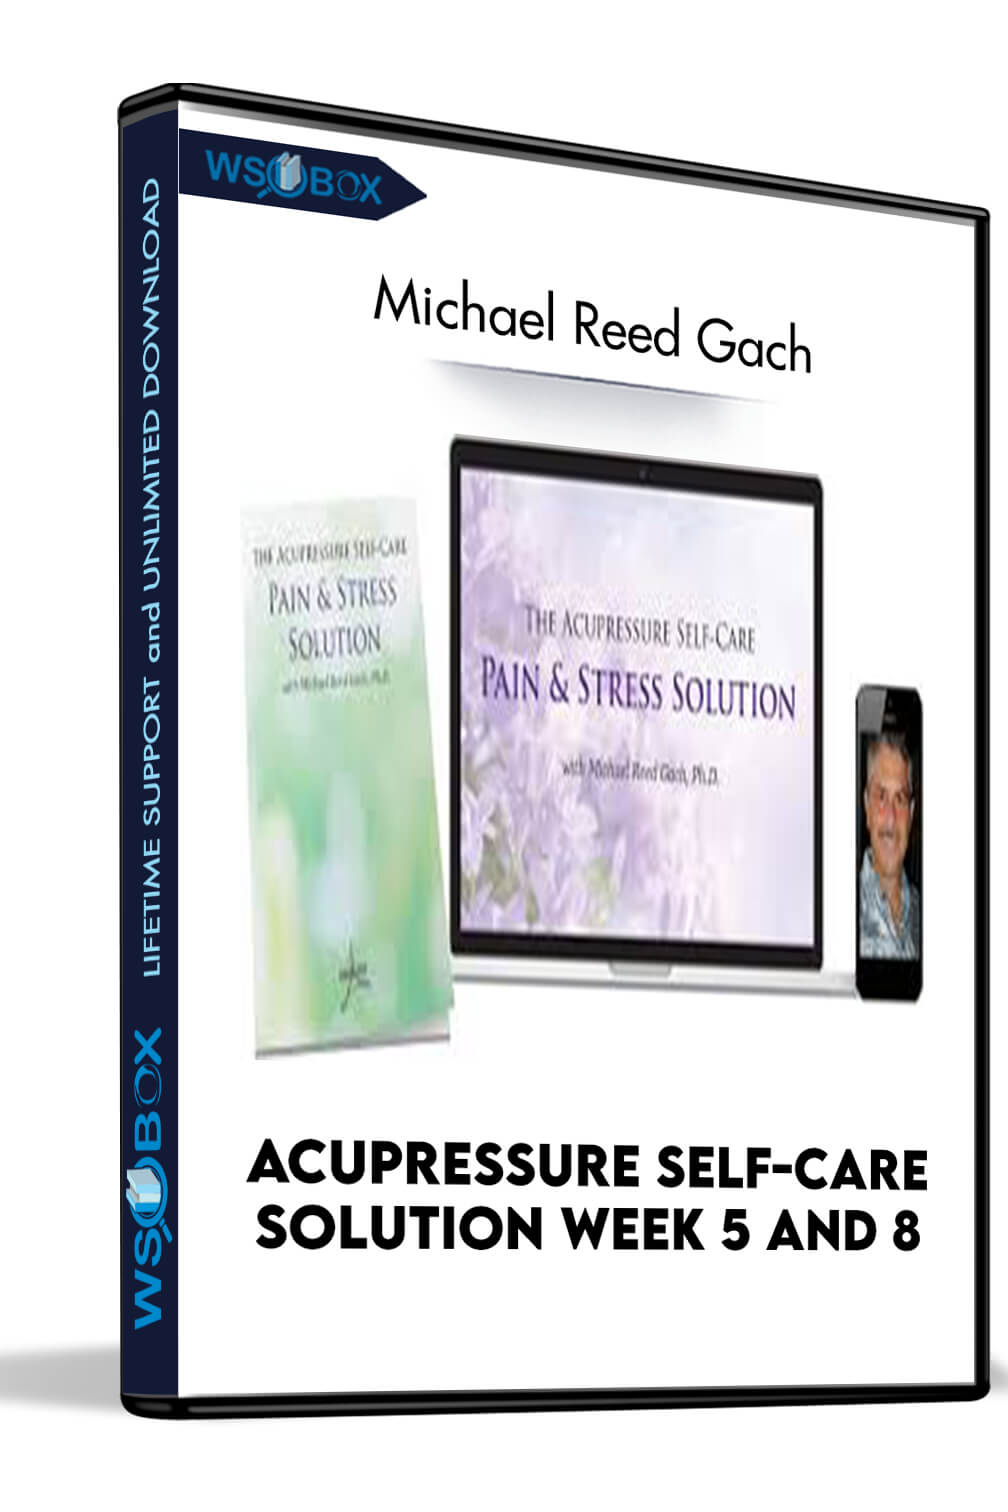 Acupressure Self-Care Solution Week 5 and 8 - Micheal Reed Gach